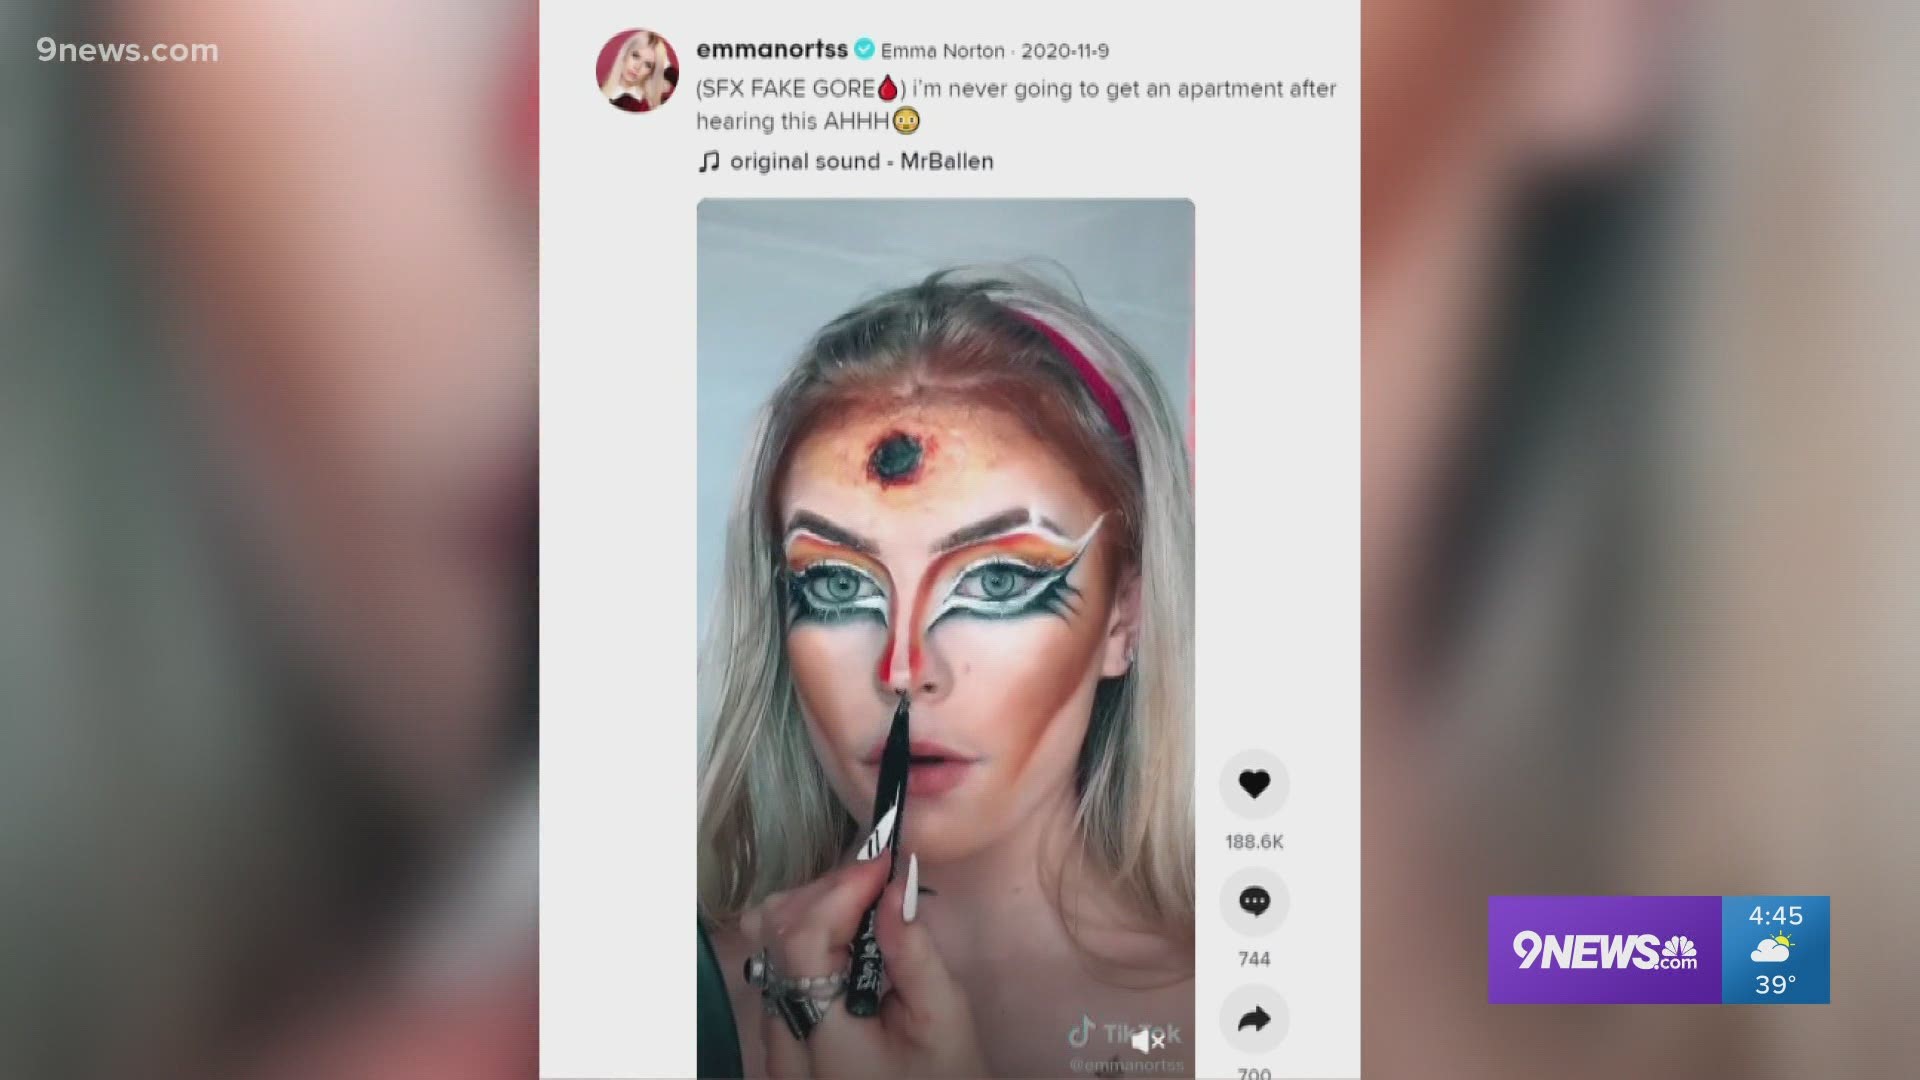 Emma Norton, 17, creates makeup videos and does voiceover work and acting. She went viral on TikTok about a year ago.